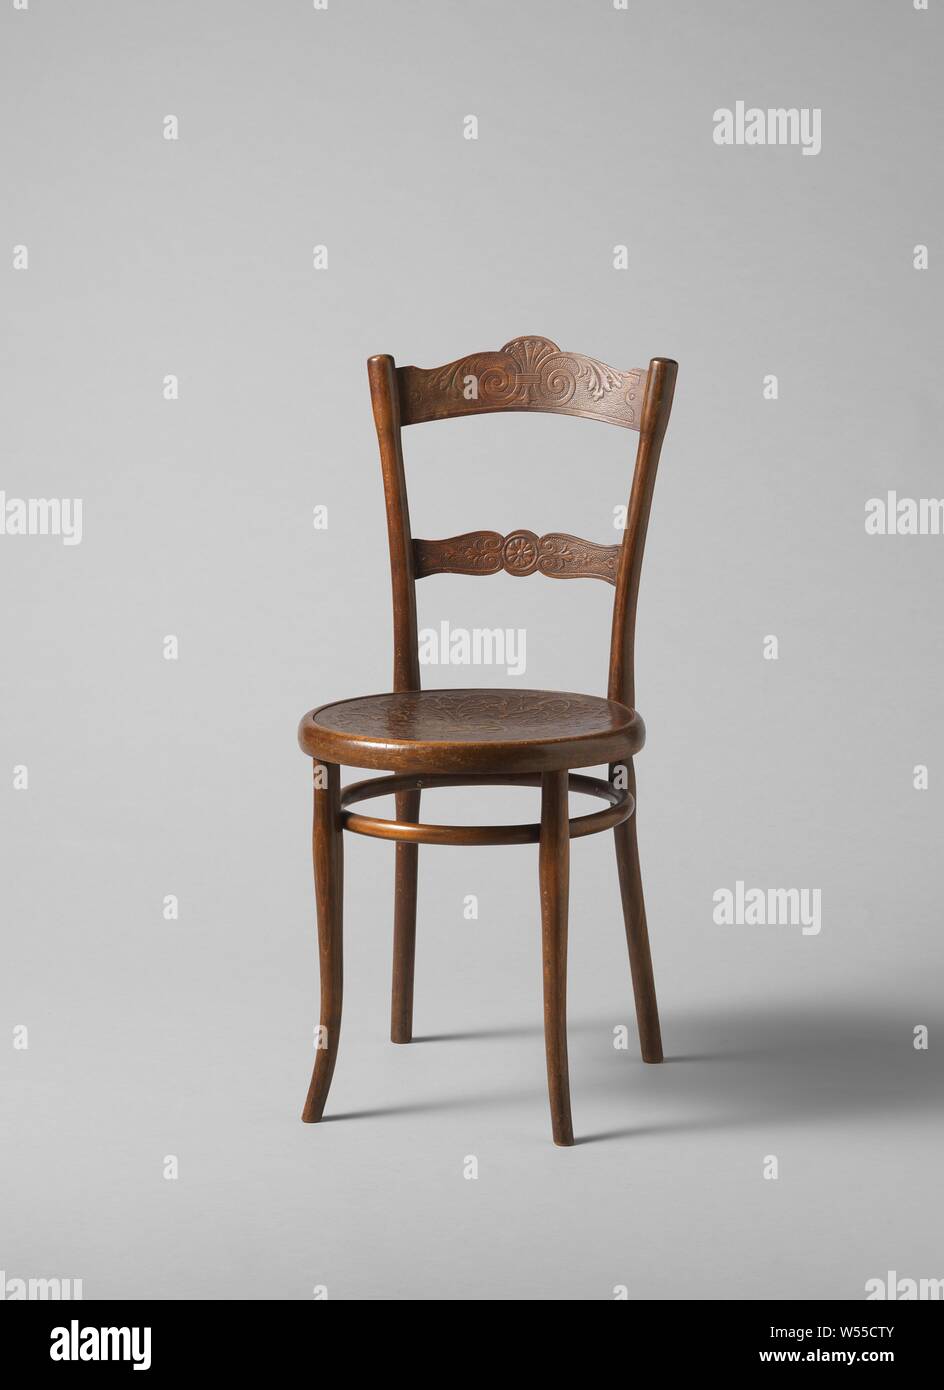 Furniture, Thonet chair., Gebrüder Thonet, Germany (possibly), 1900 - 1987,  wood (plant material), beech (wood), plywood, iron (metal), h 91 cm × w 42  cm × d 50 cm Stock Photo - Alamy